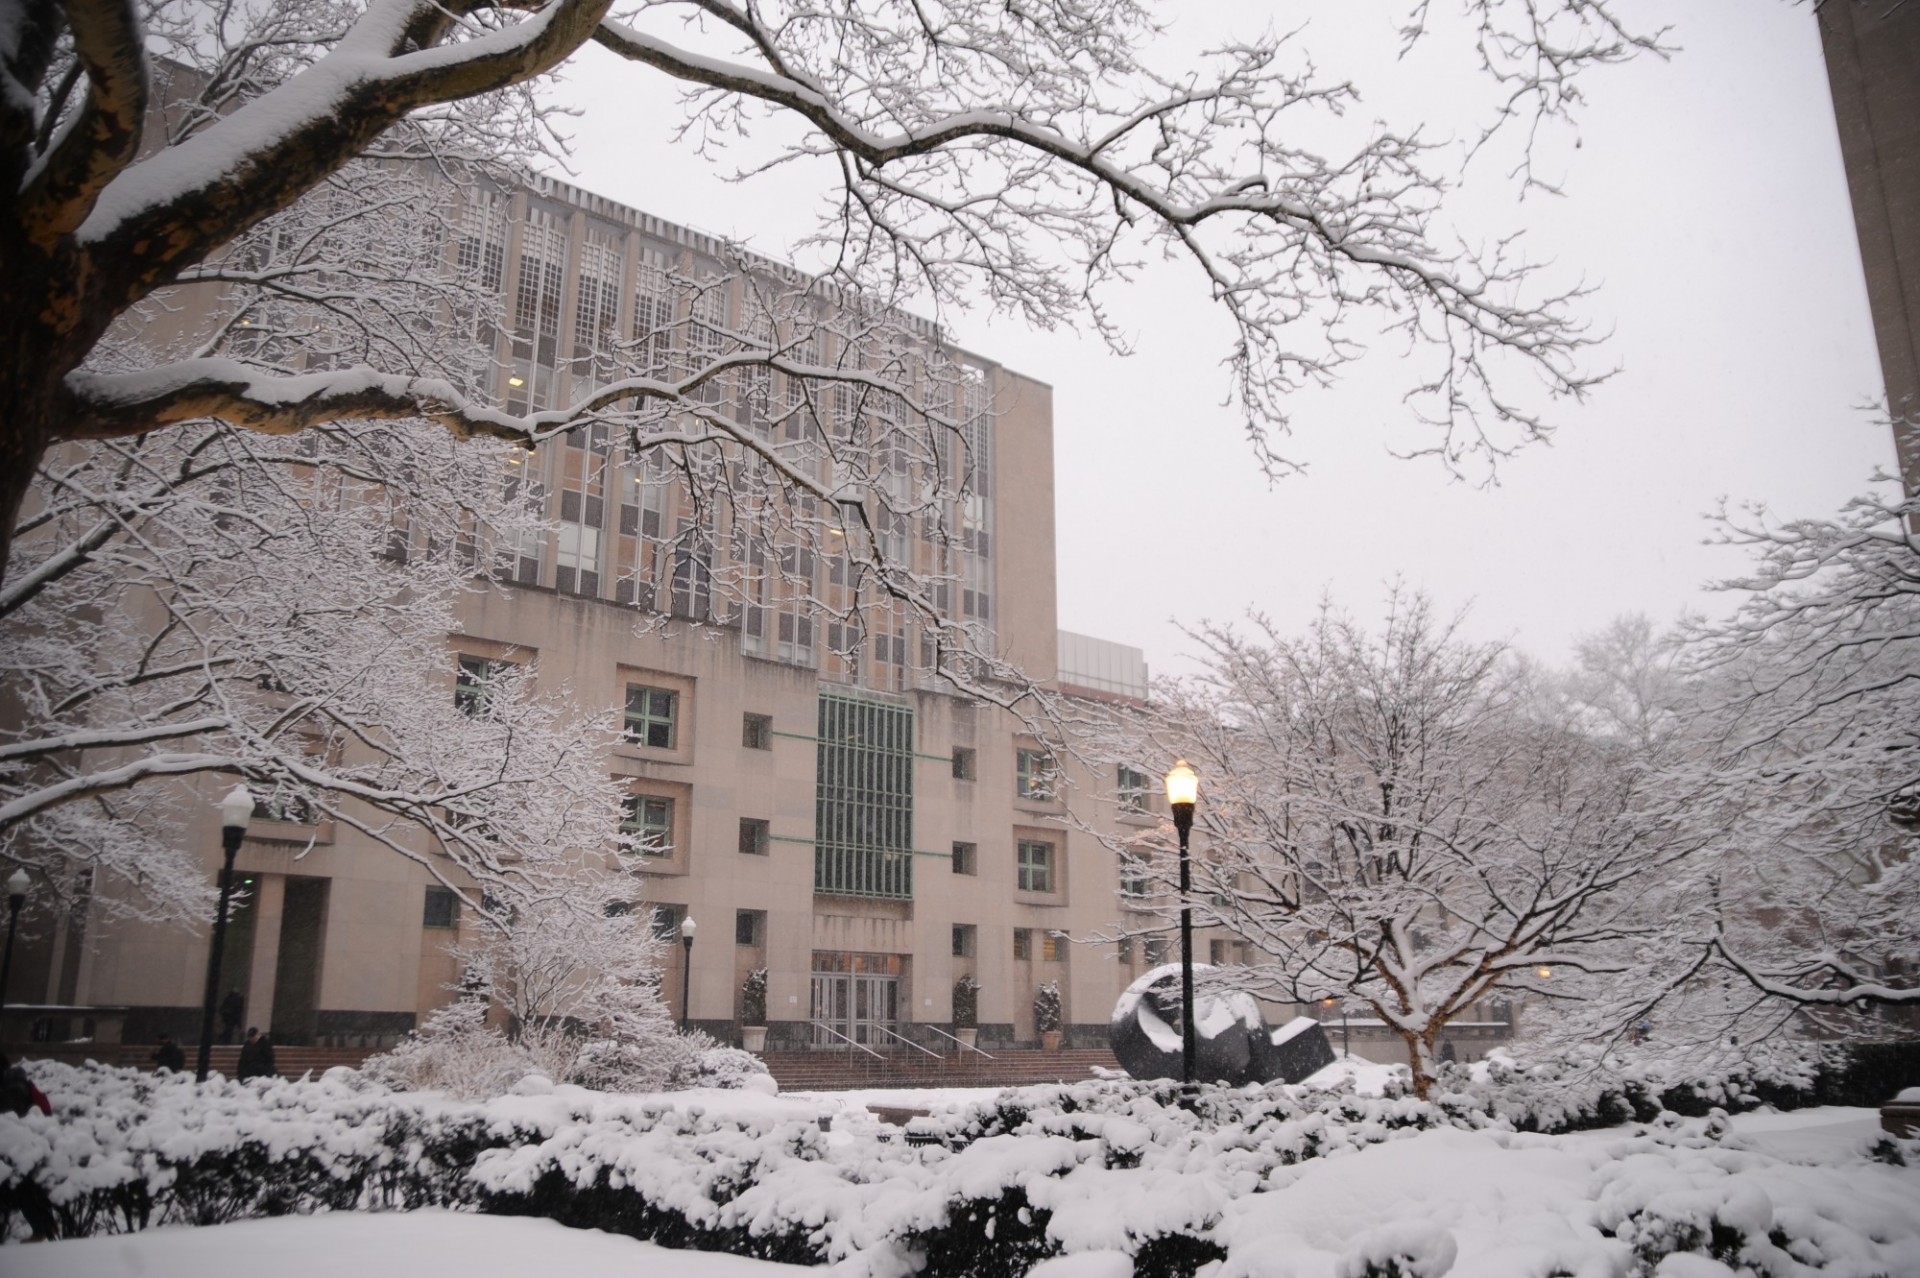 Uris Hall during the winter, surrounded by snow.